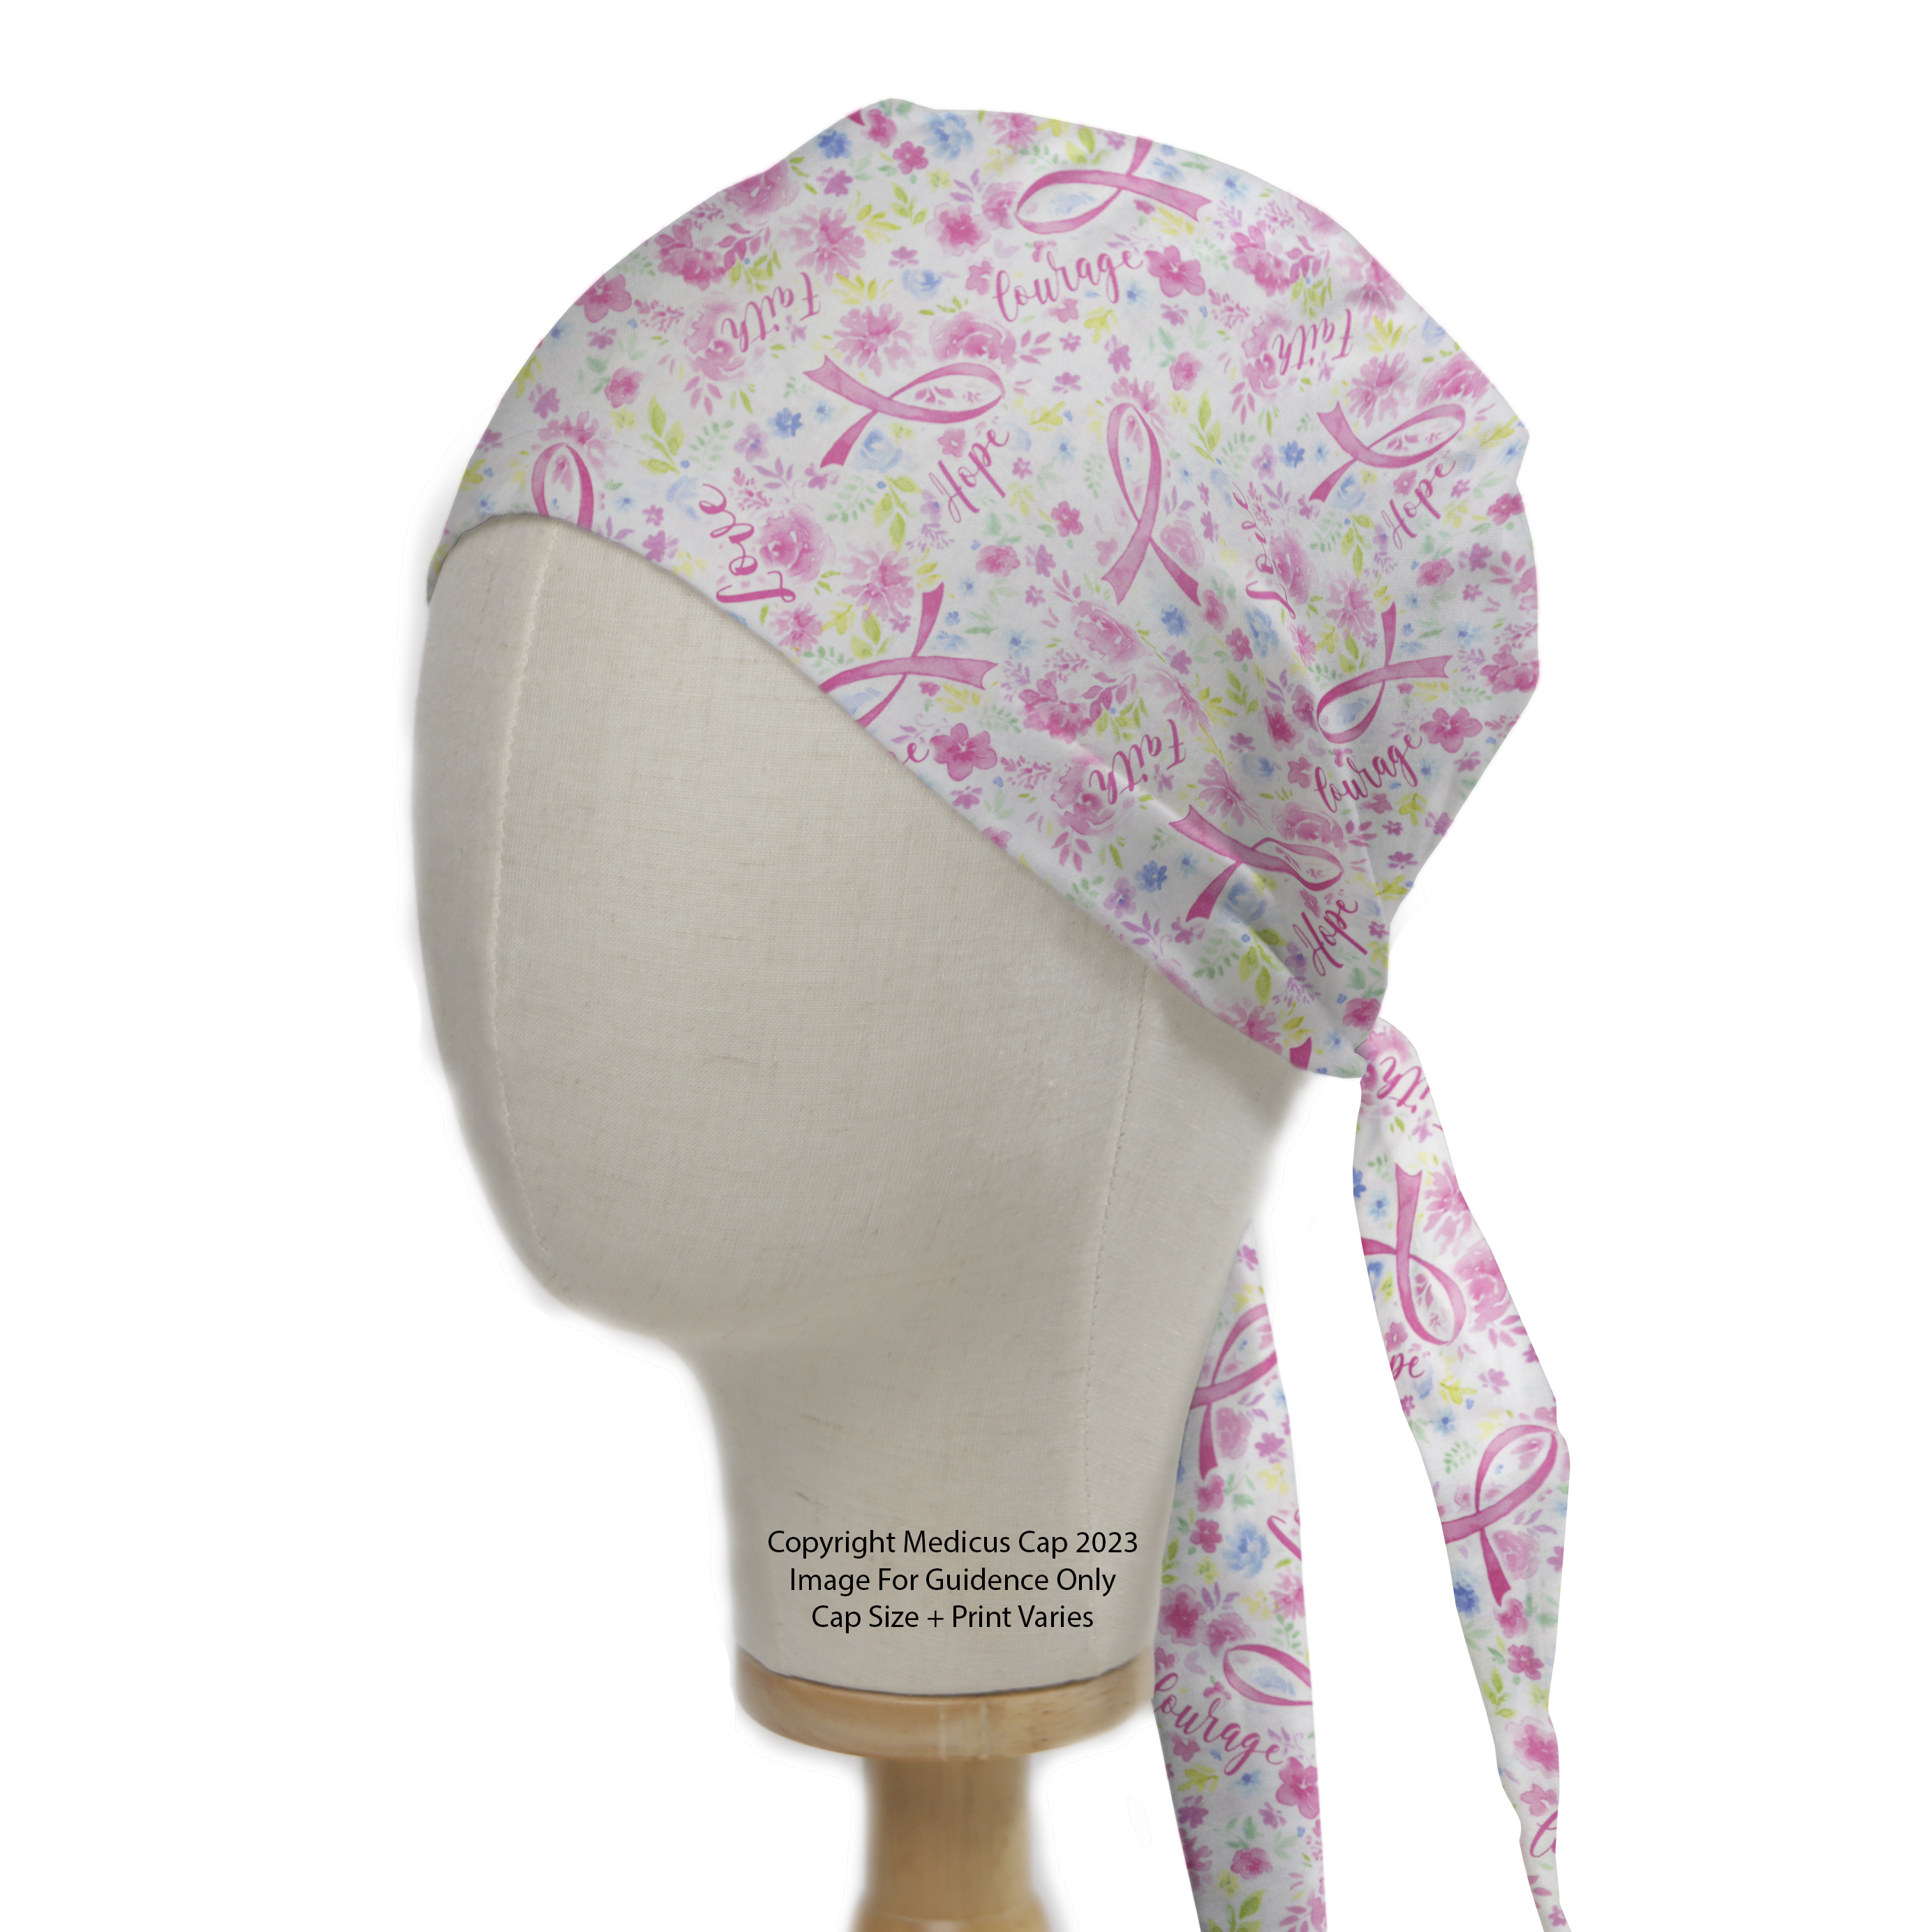 Breast Cancer Awareness #1 Scrub Cap - Scrub Cap from Medicus Scrub Caps - Shop now at Medicus Scrub Caps - all, Cancer Related, Equality + Empowerment, Flowers, Medical Themed, new-arrivals, Patterned Scrub Caps